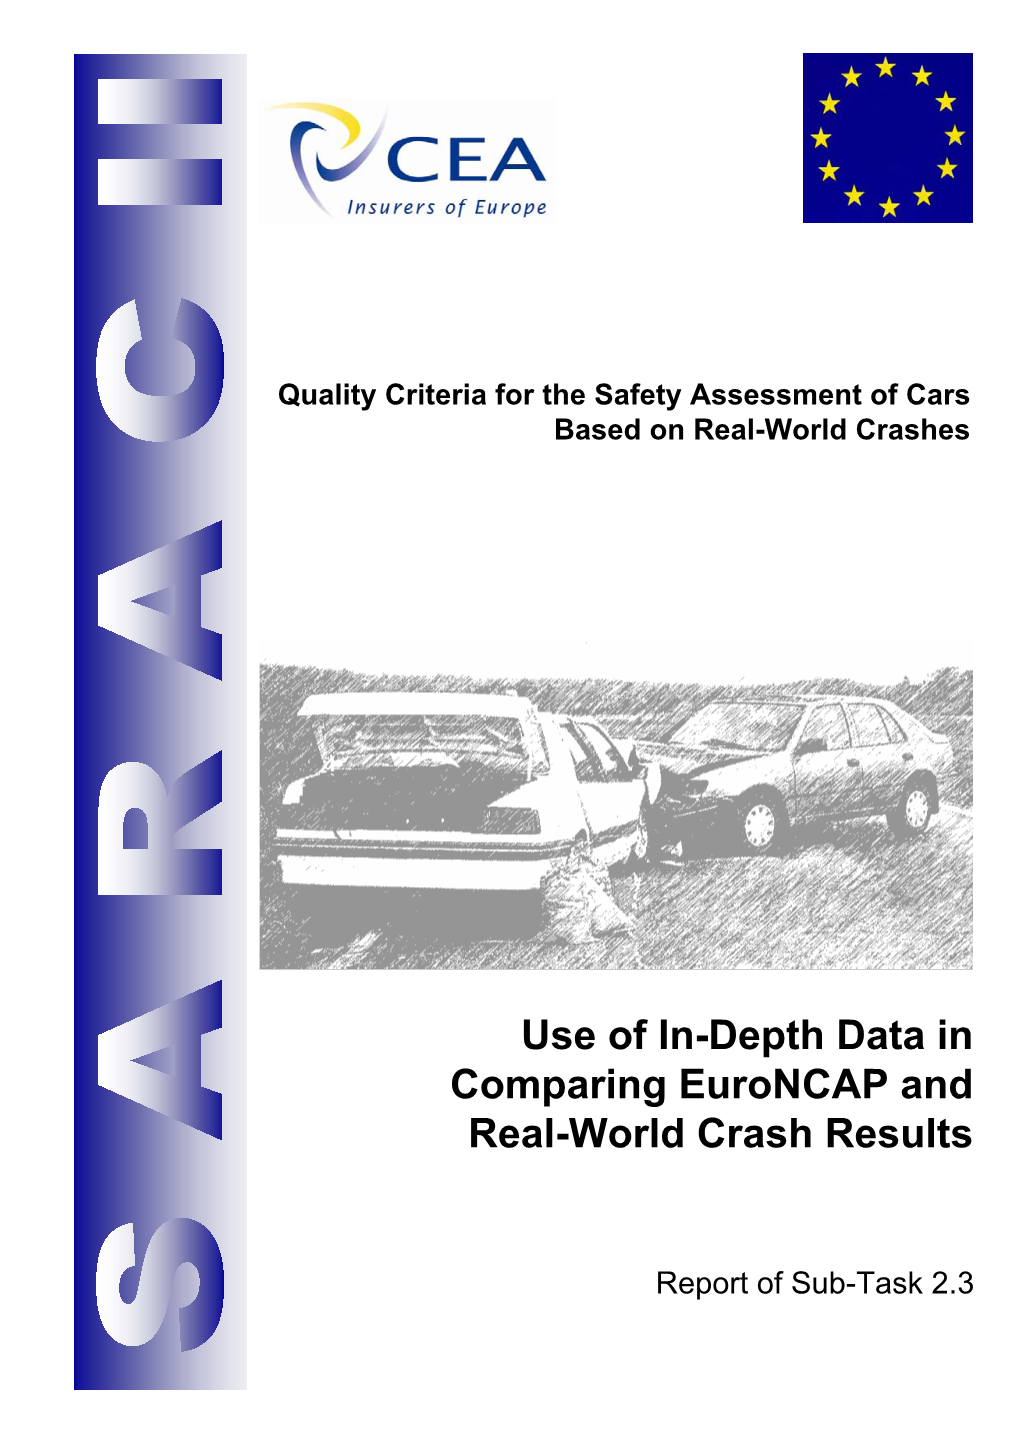 Use of In-Depth Data in Comparing Euroncap and Real-World Crash Results